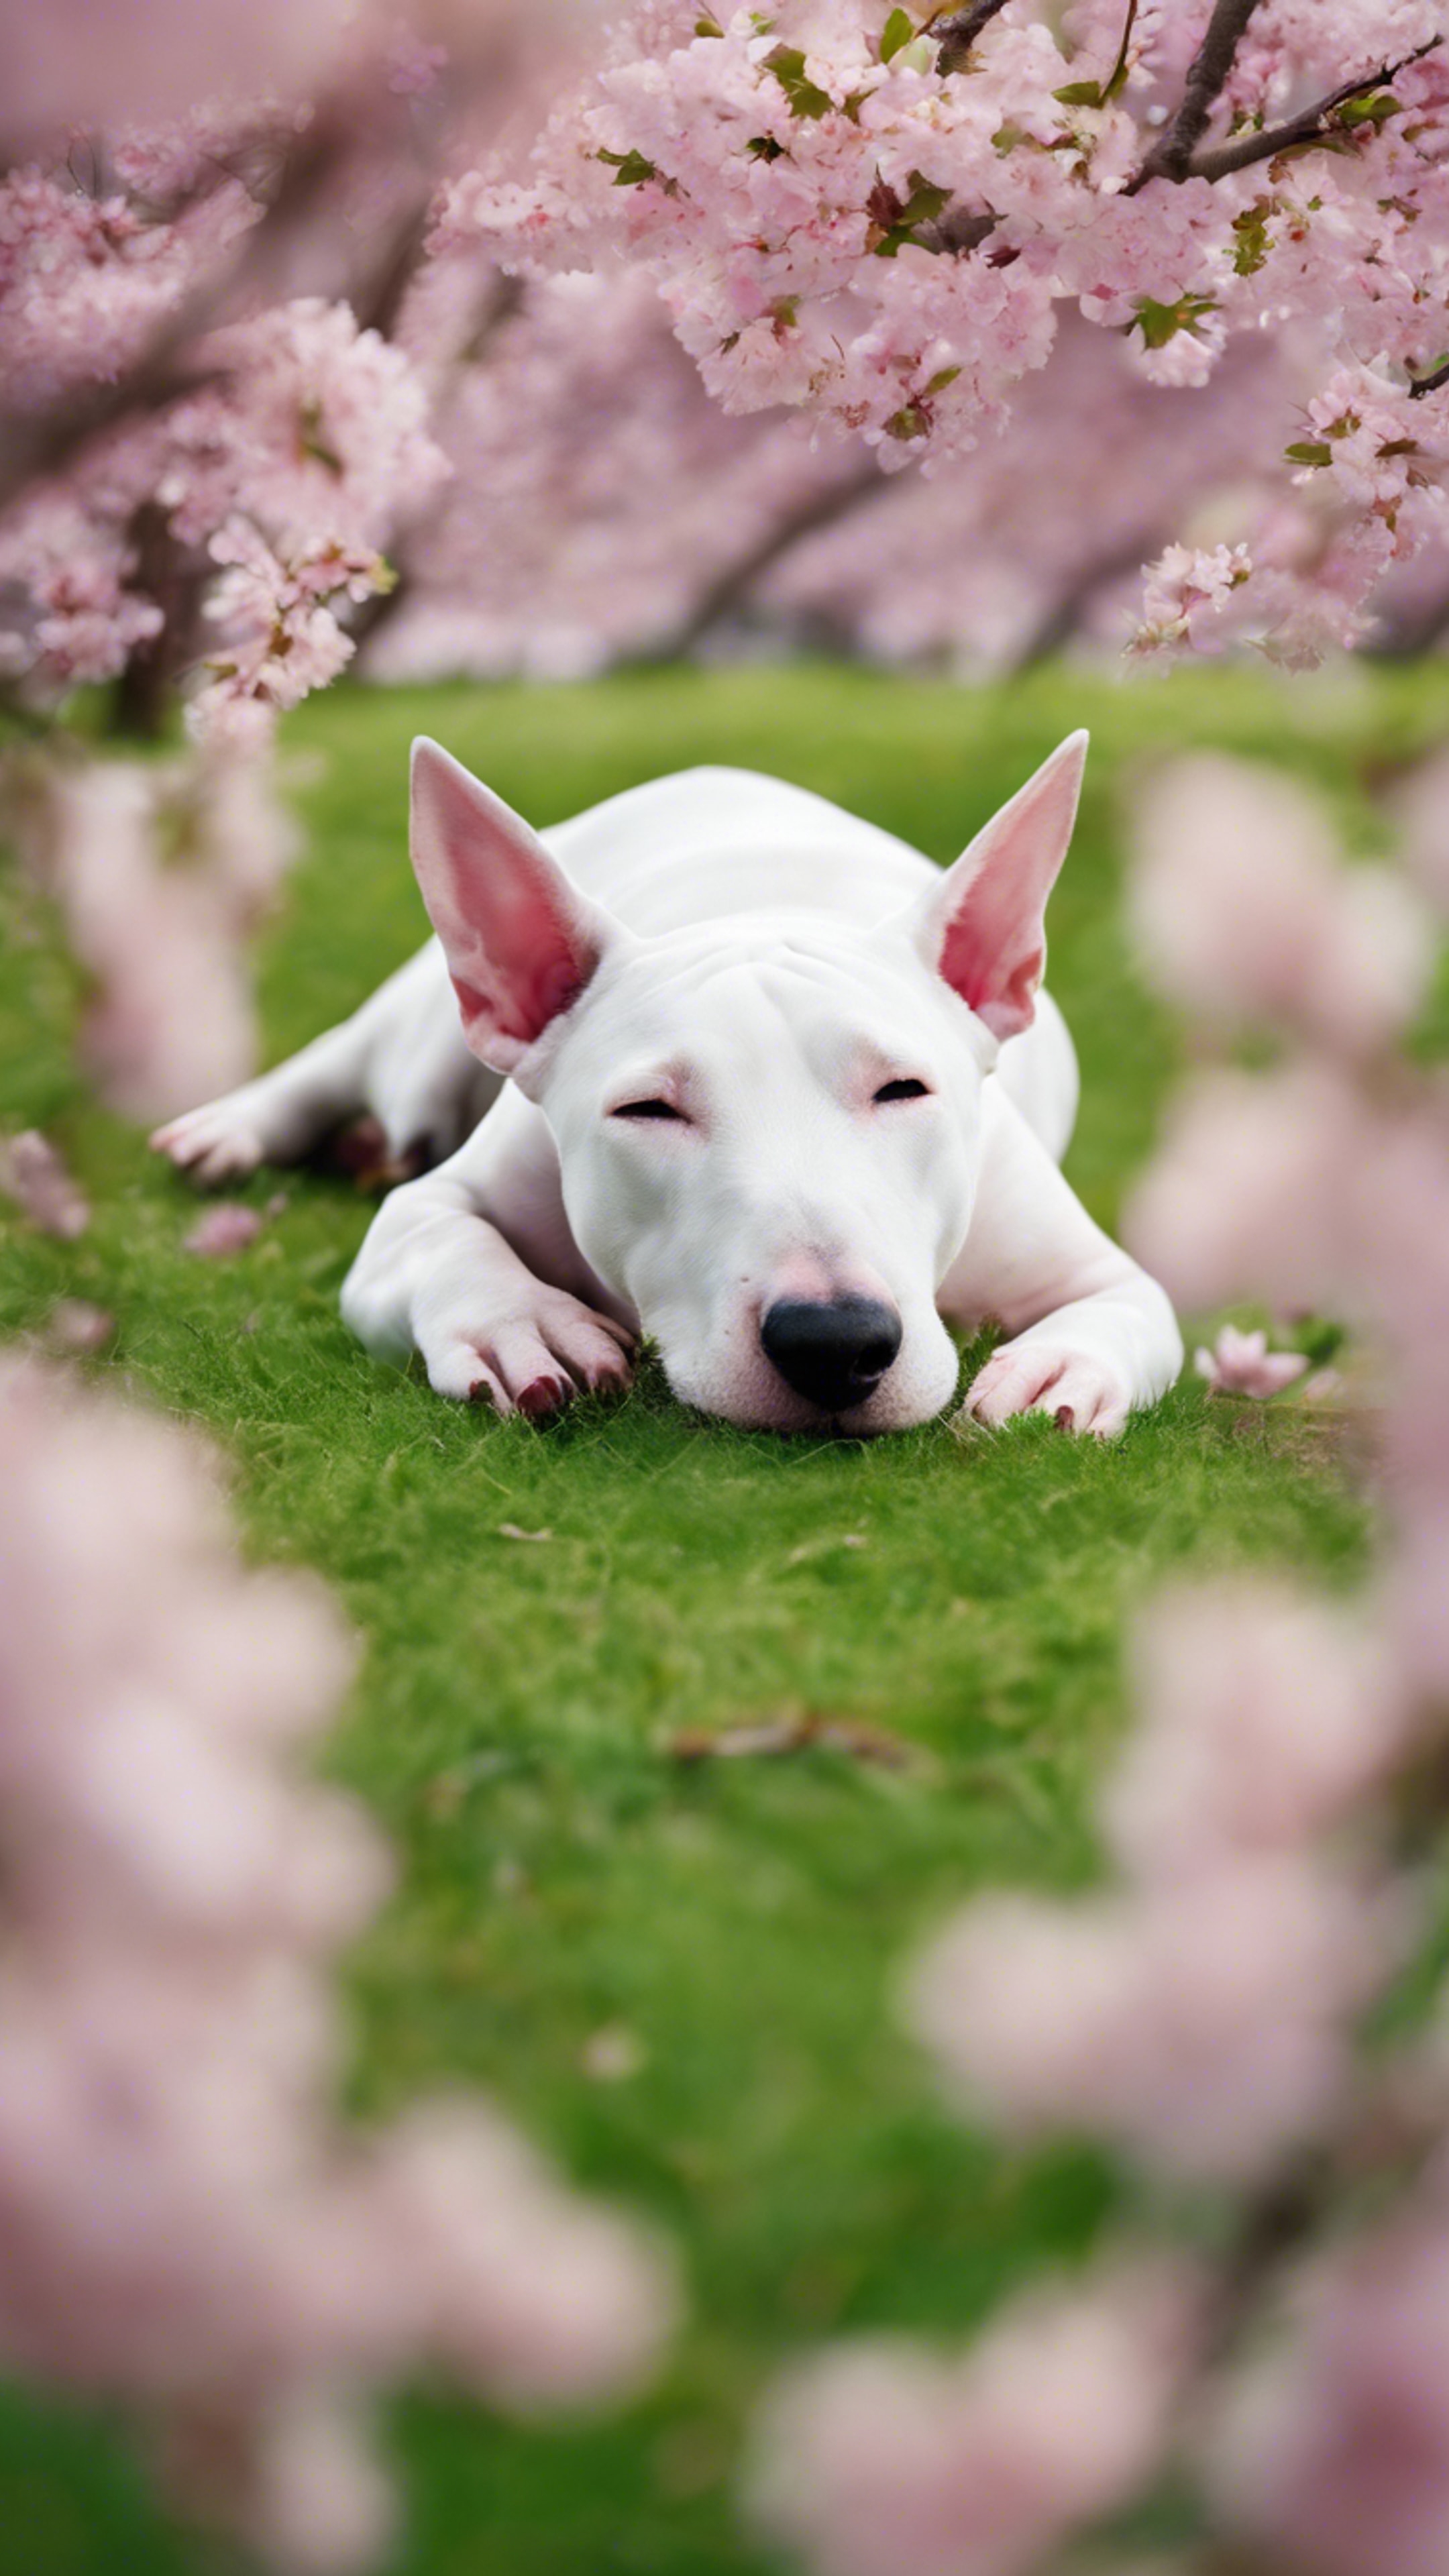 A Bull Terrier curled into a ball, sleeping in a bright green city park at the base of a cherry blossom tree. Fondo de pantalla[3df408a3b3f7480298db]